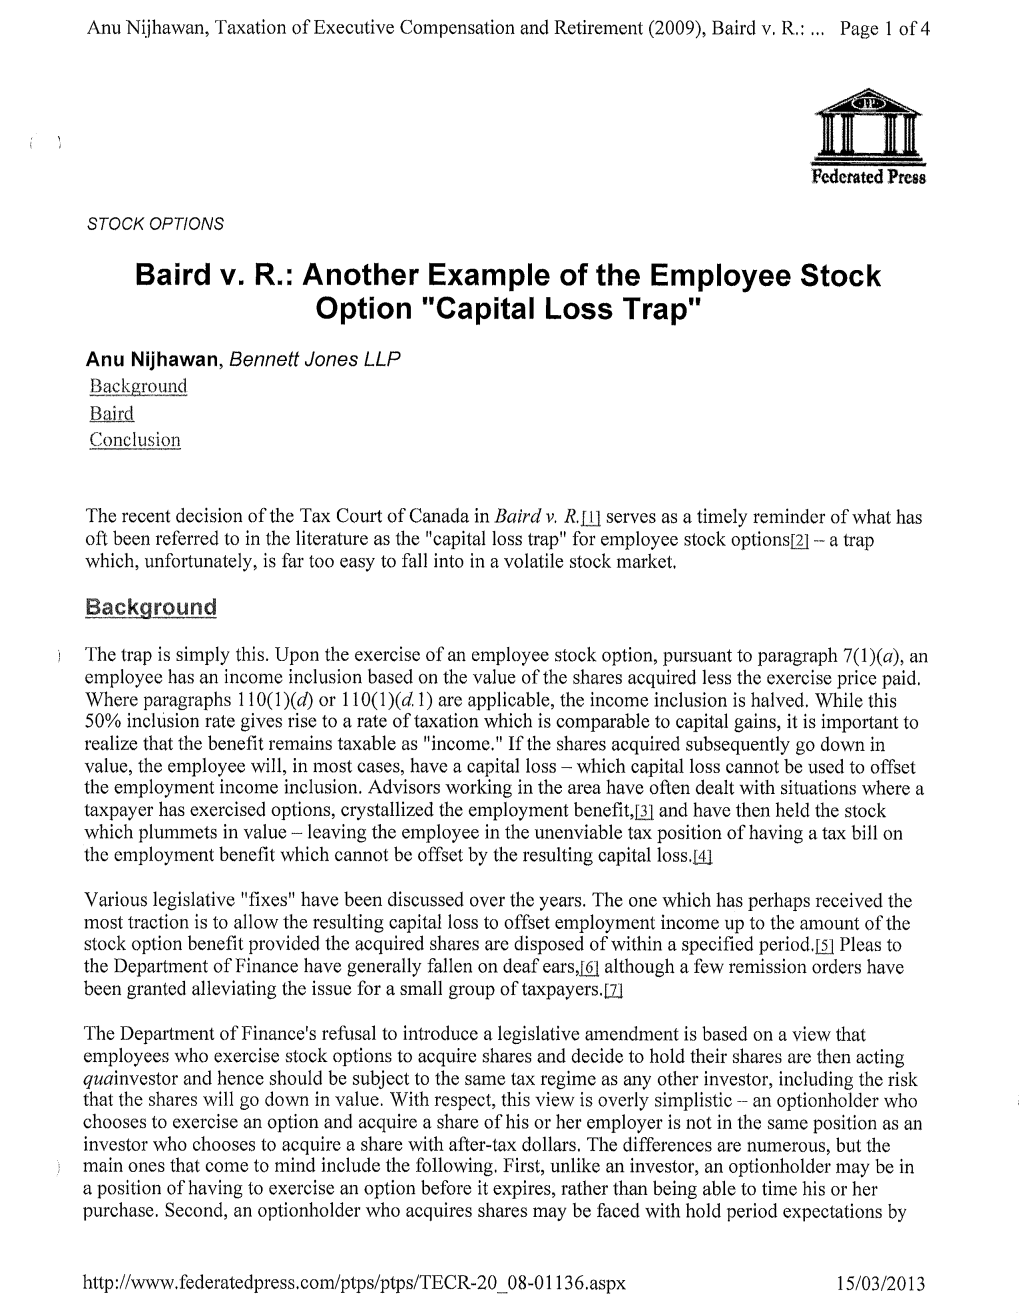 Another Example of the Employee Stock Option "Capital Loss Trap"